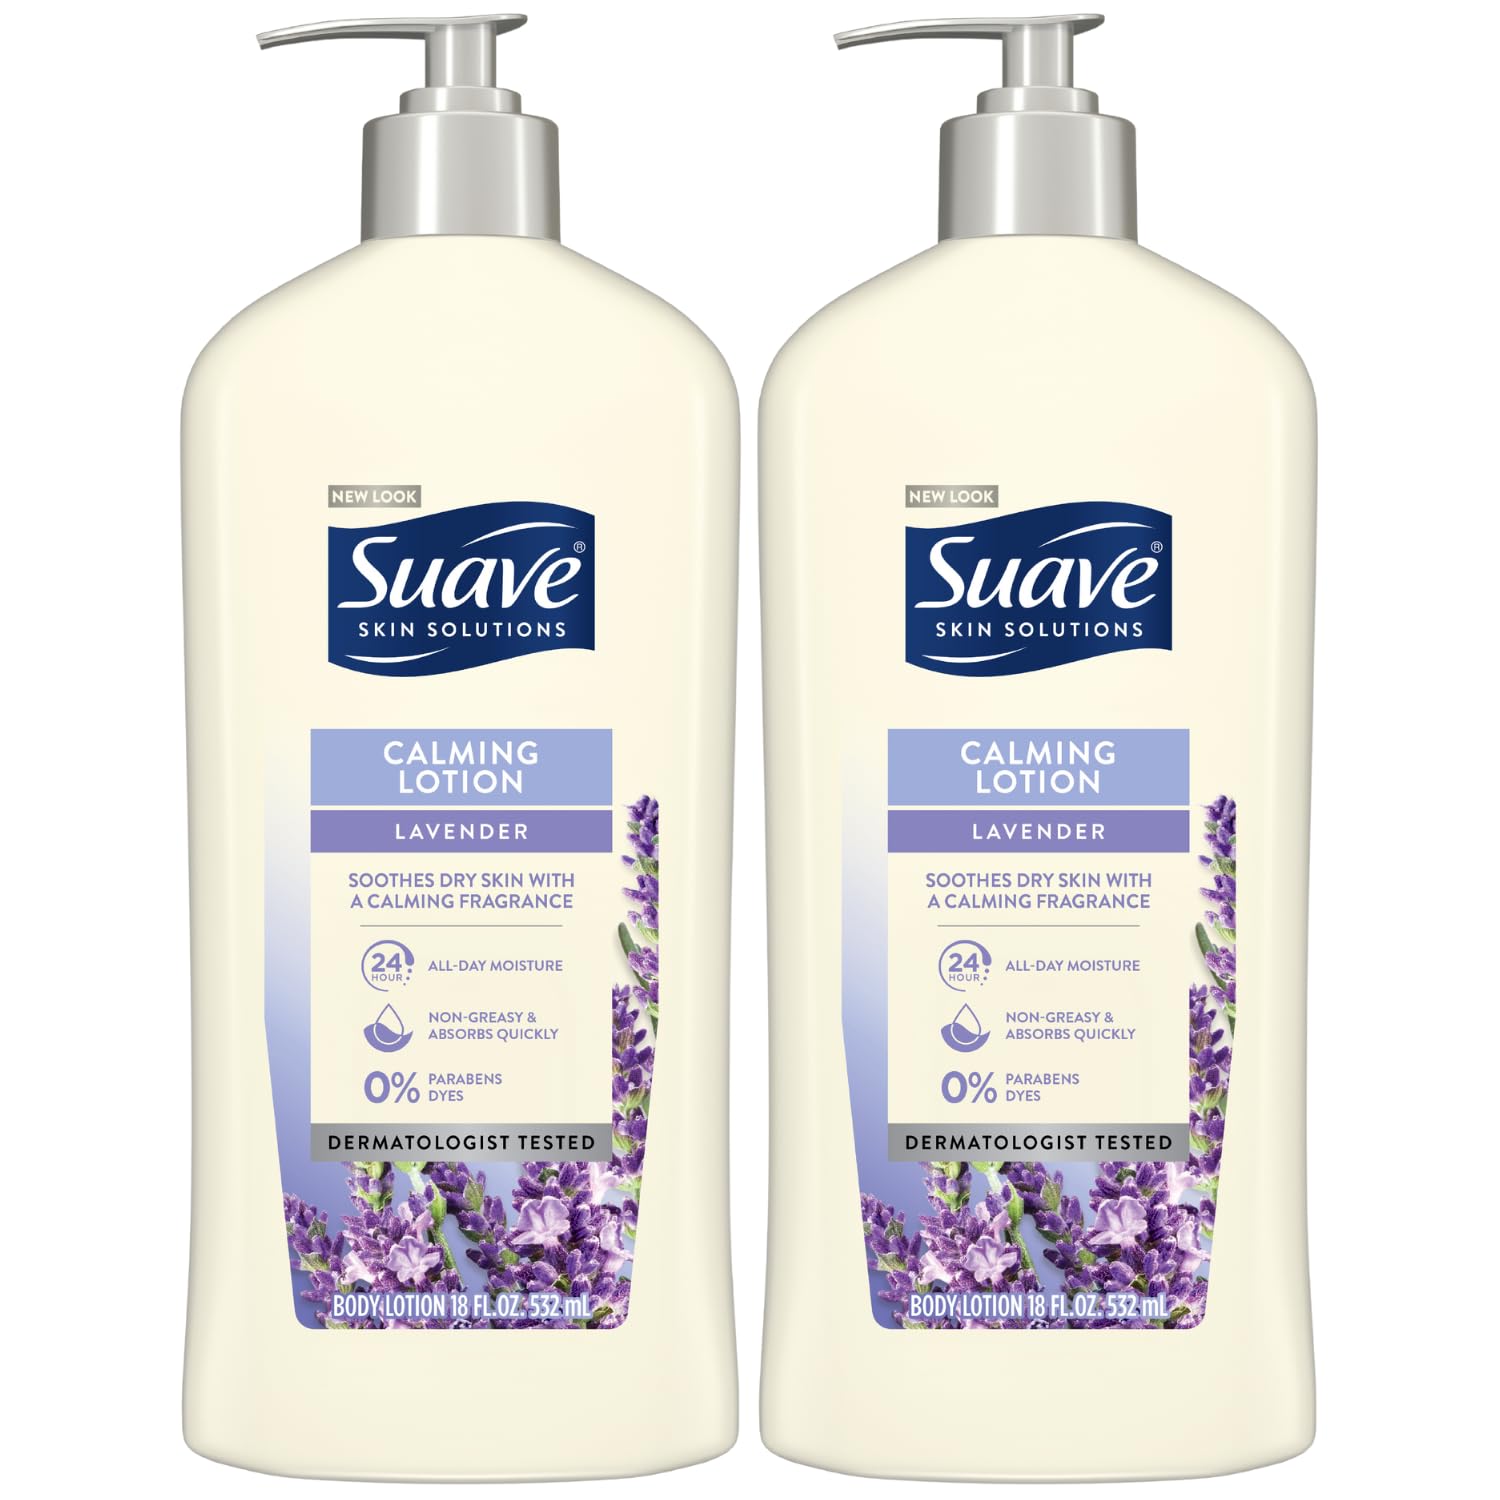 Suave Body Lotion, Lavender Calming Lotion – Moisturizing Body Lotion for Dry Skin Infused with Lavender and Vanilla Bean Extracts, Paraben-Free, Scented Lotion, 18 Oz (Pack of 2)